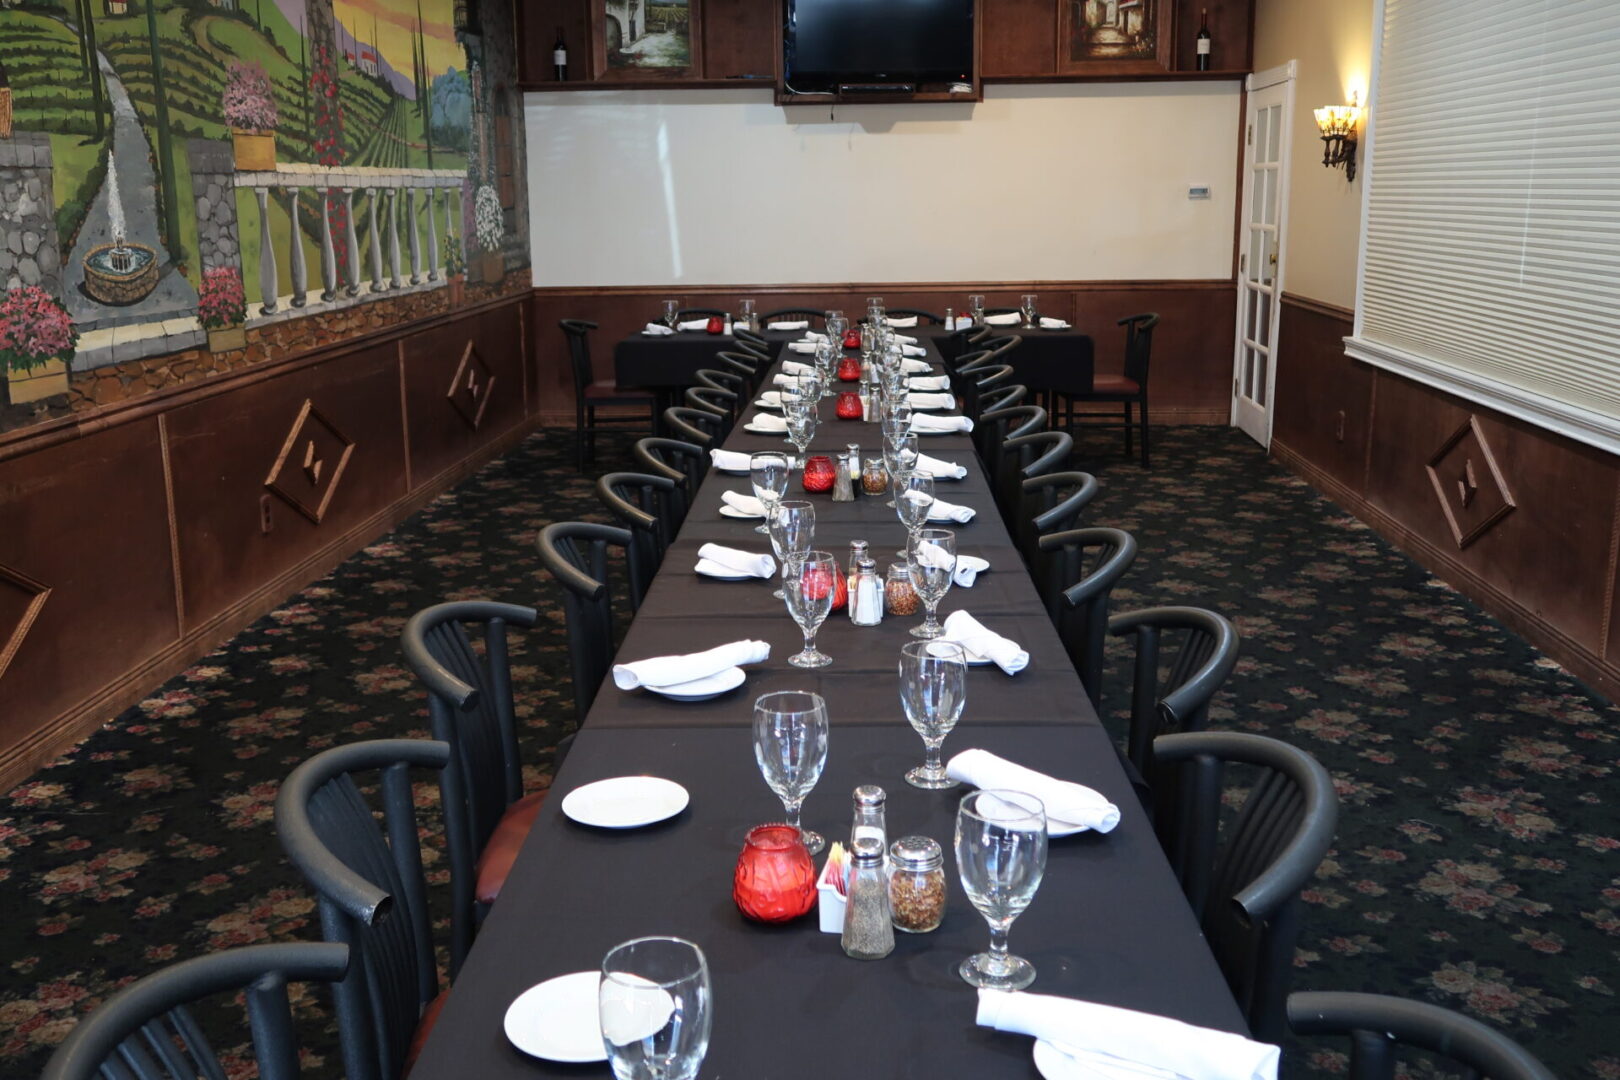 A long table with black cloth and white napkins.